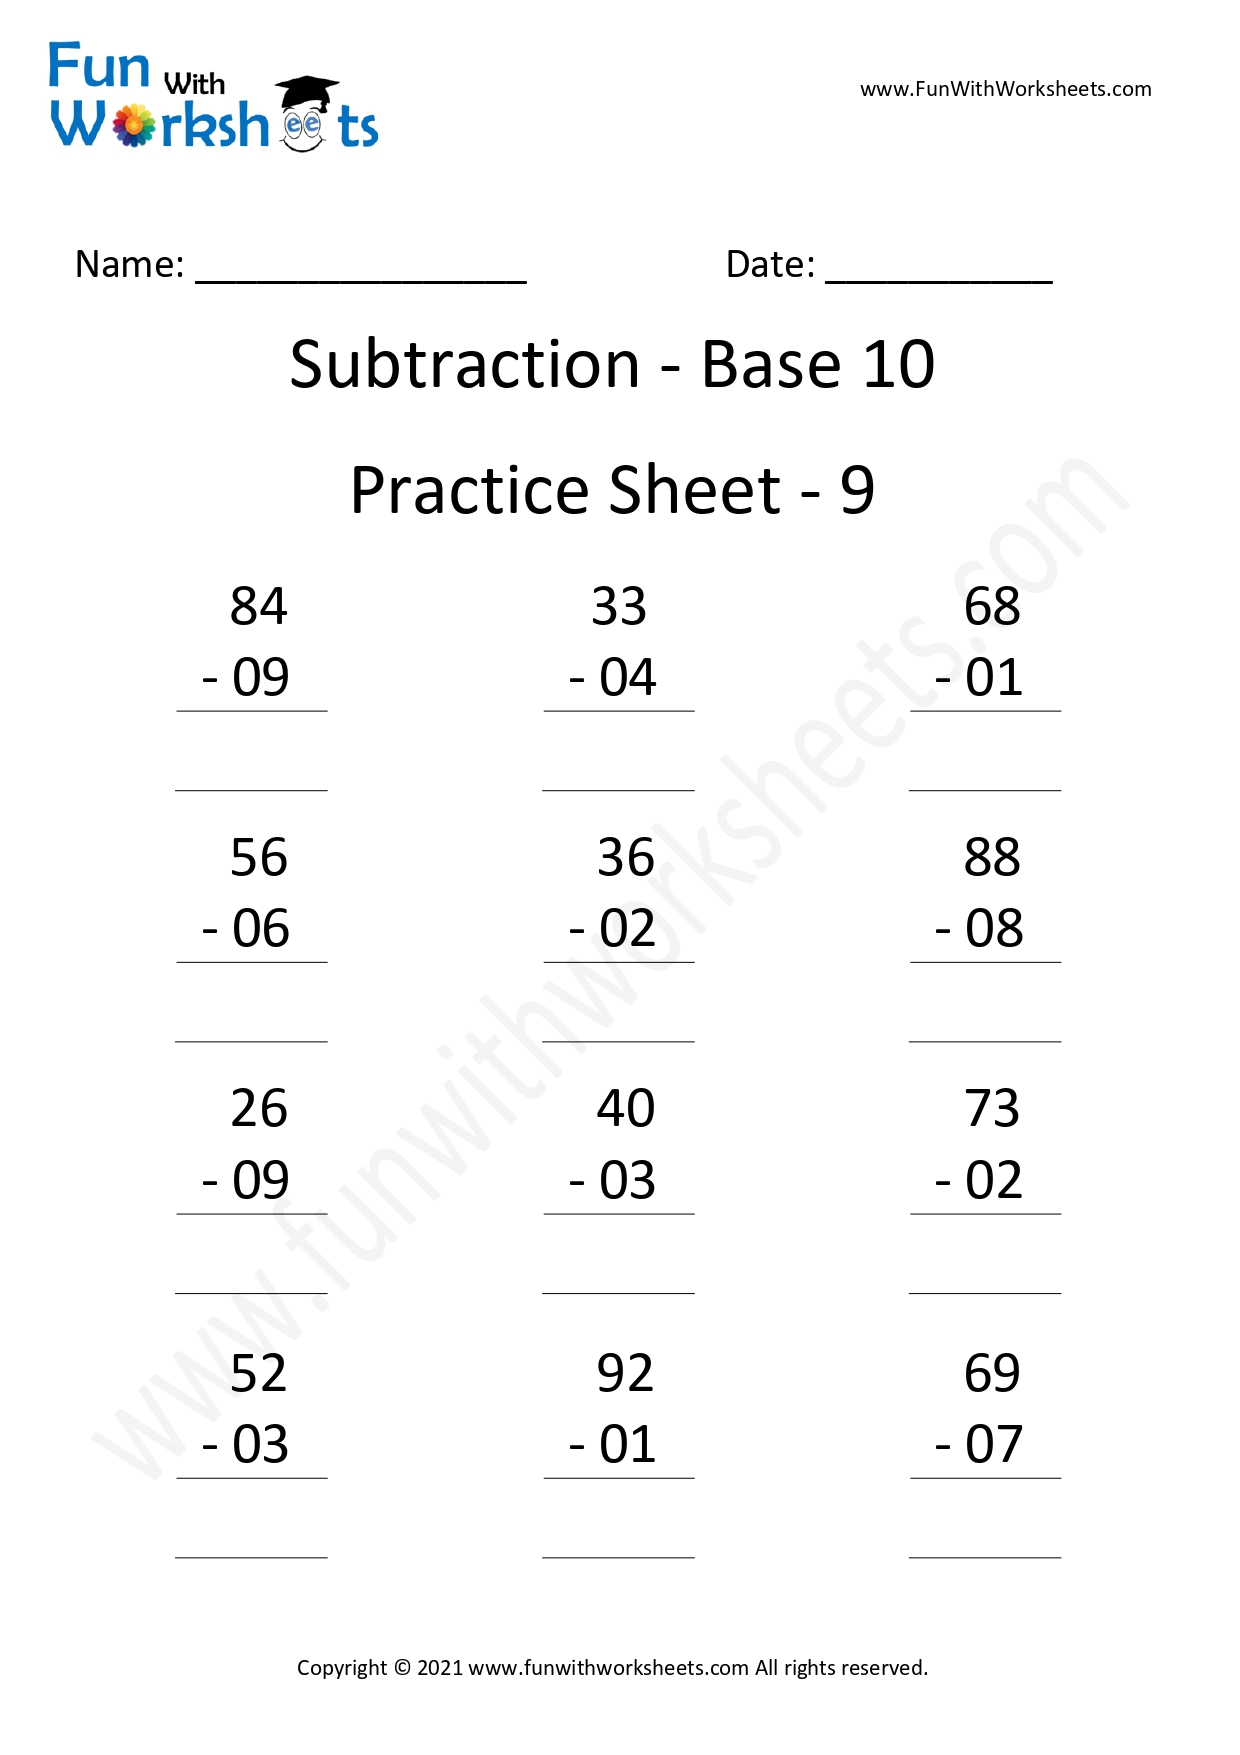 free printable worksheets vedic subtraction base 10 practice sheets archives fun with worksheets